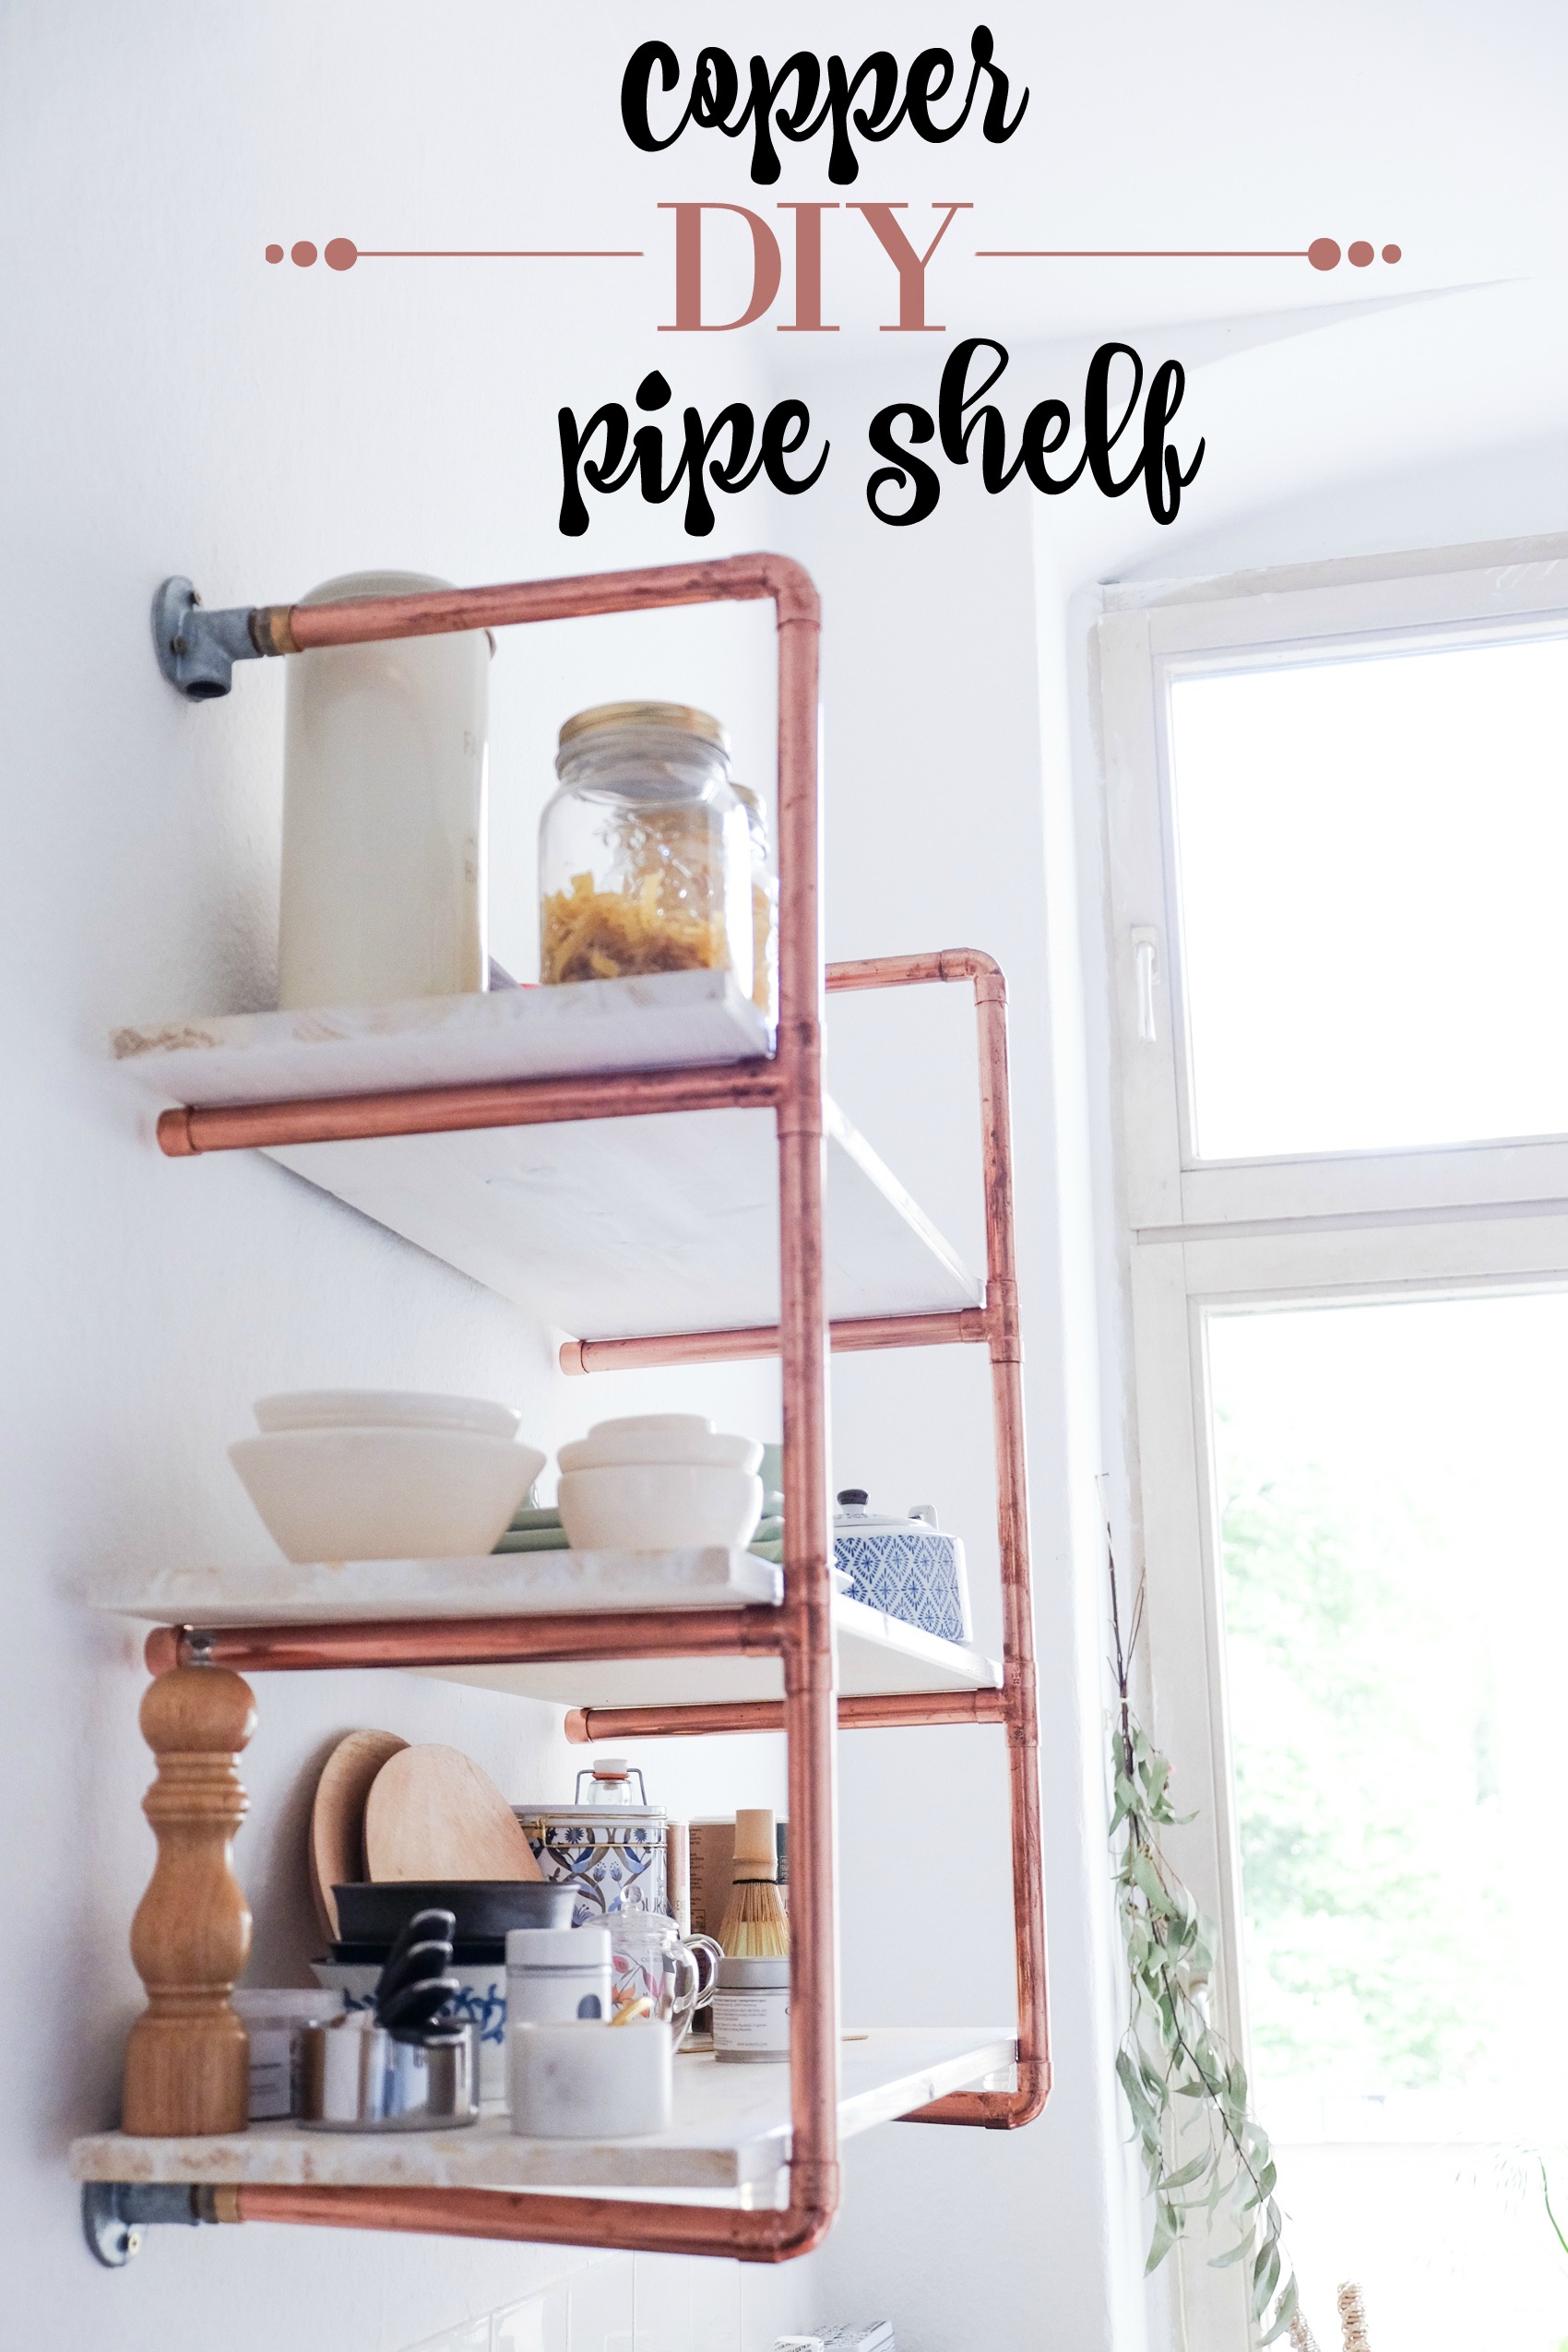 Diy Copper Pipe Shelf Detailed, Diy Shelving With Pipes